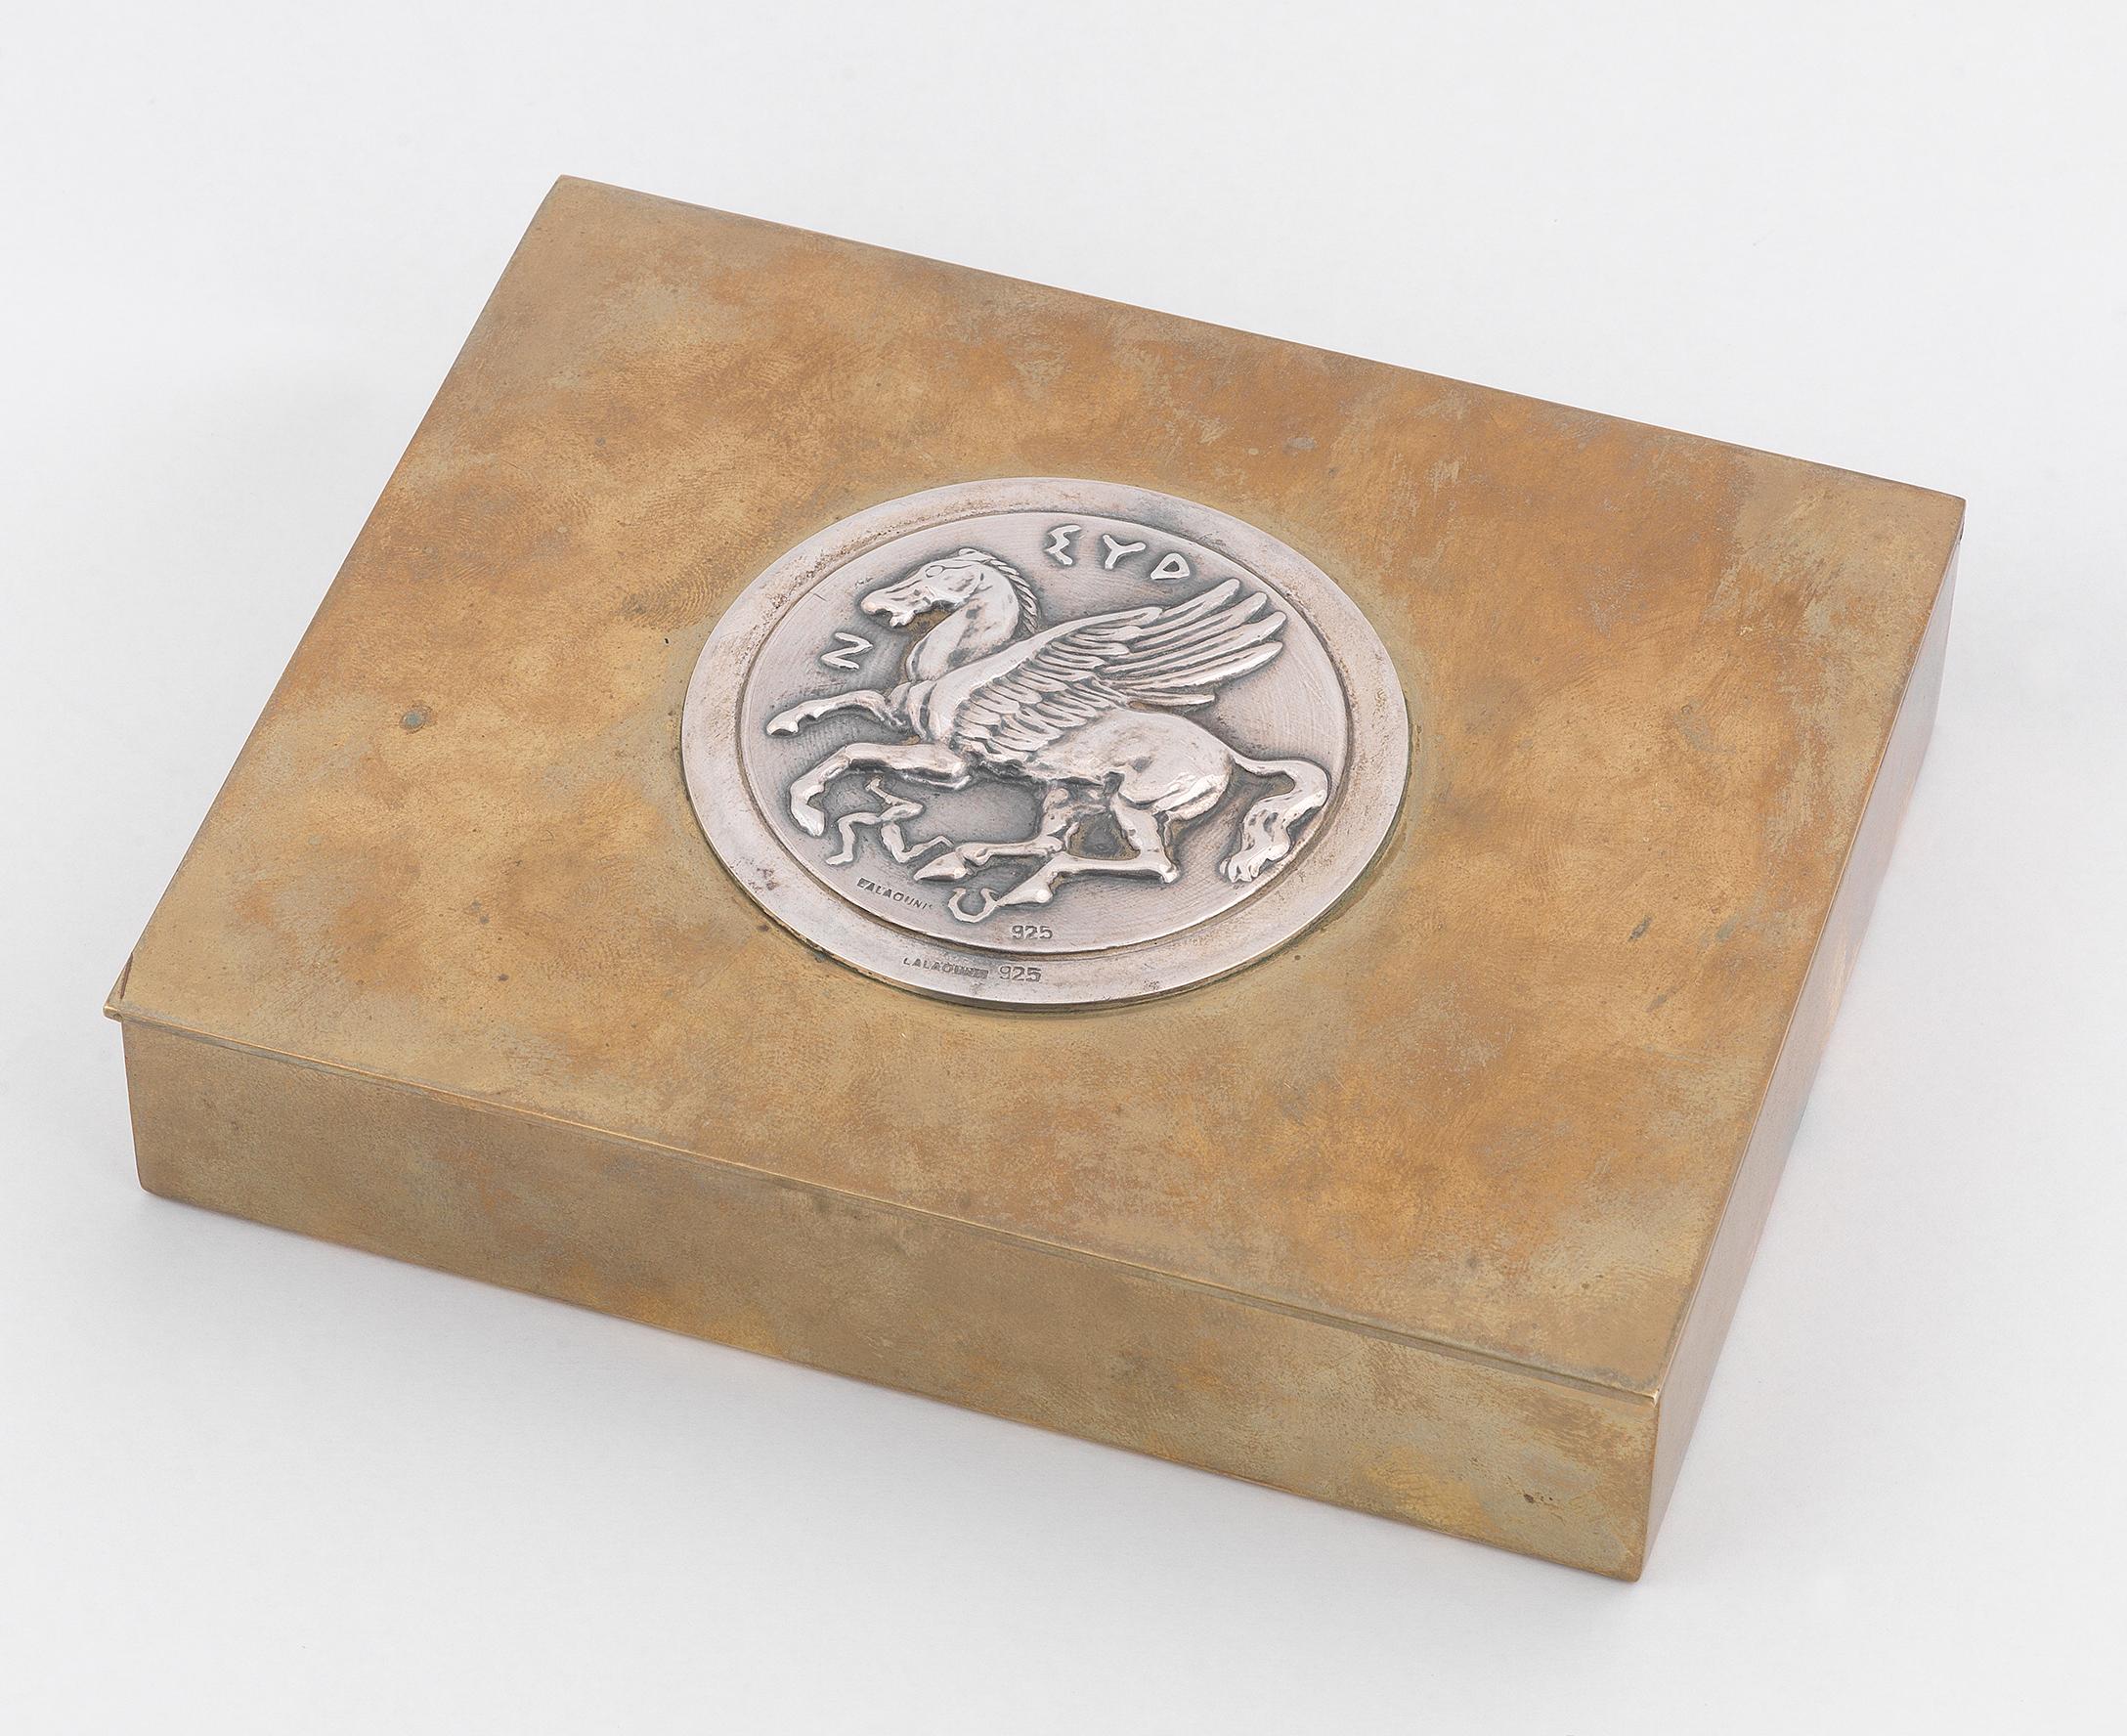 Post-Modern Rare Pegasus Cigarette Box by Lalaounis, Brass and Silver, 1970s